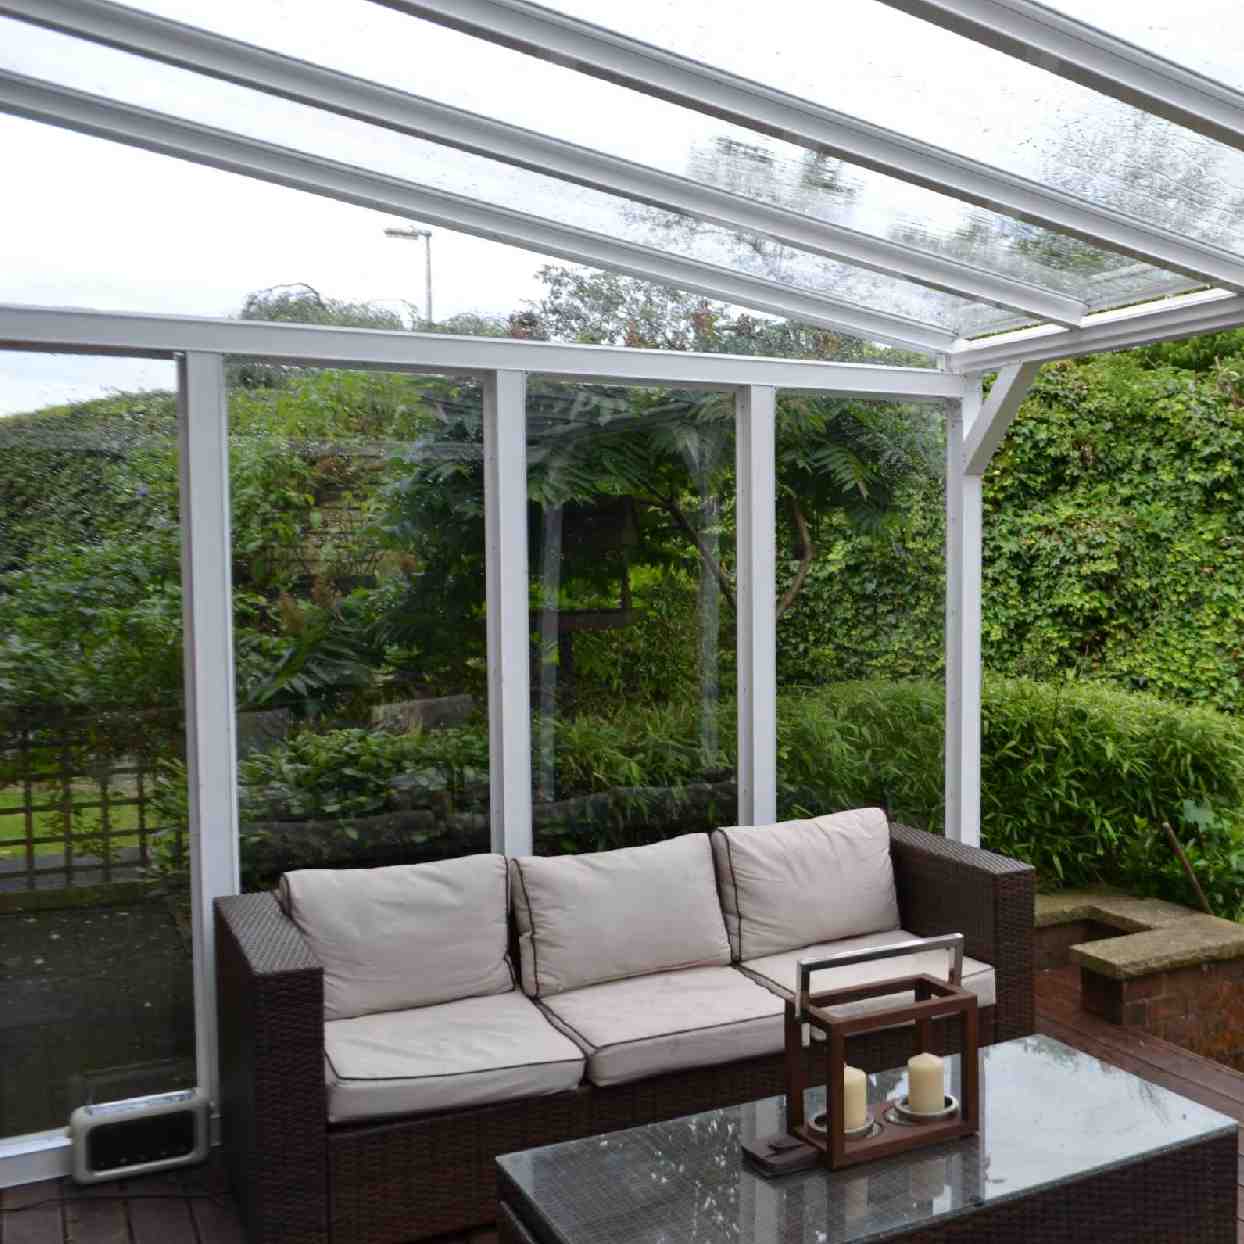 Buy Omega Verandah White with 6mm Glass Clear Plate Polycarbonate Glazing - 9.1m (W) x 3.5m (P), (5) Supporting Posts online today